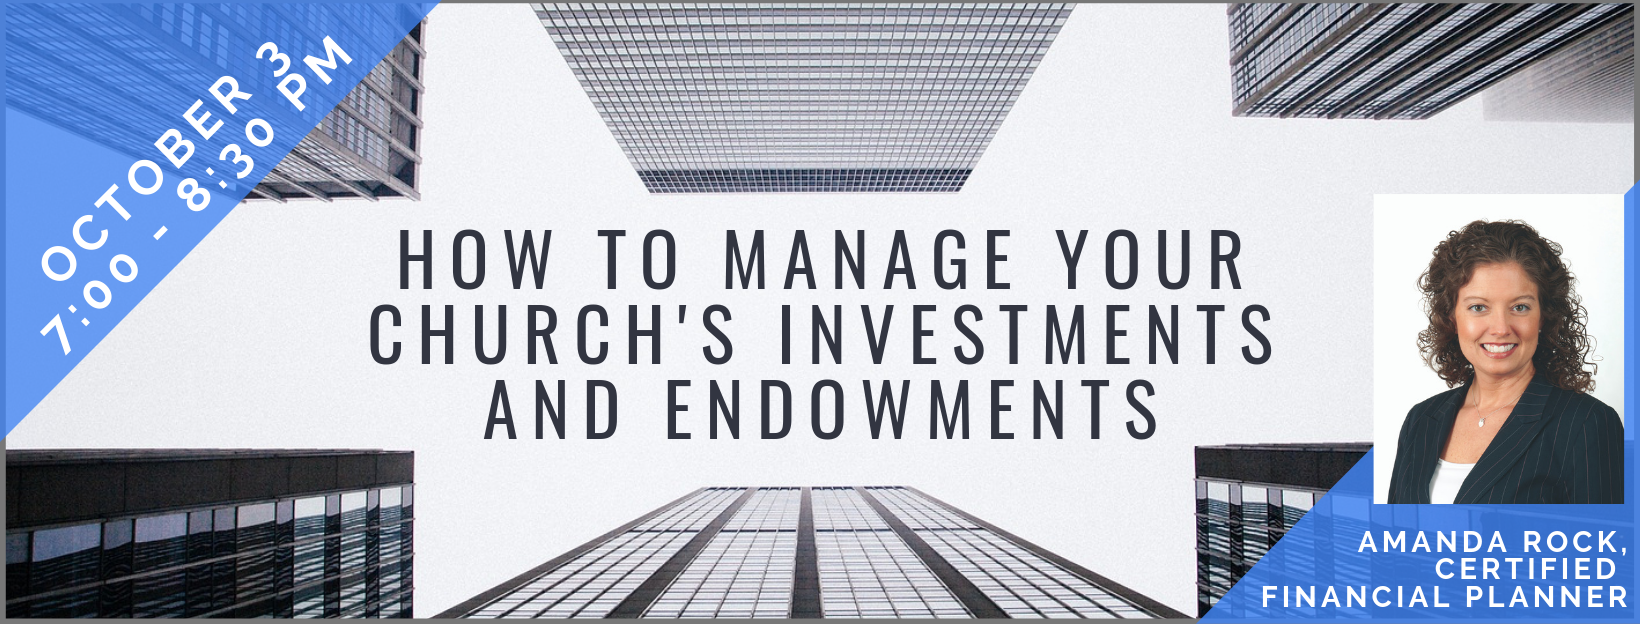 POSTPONED: How to Manage Your Church’s Investments and Endowments